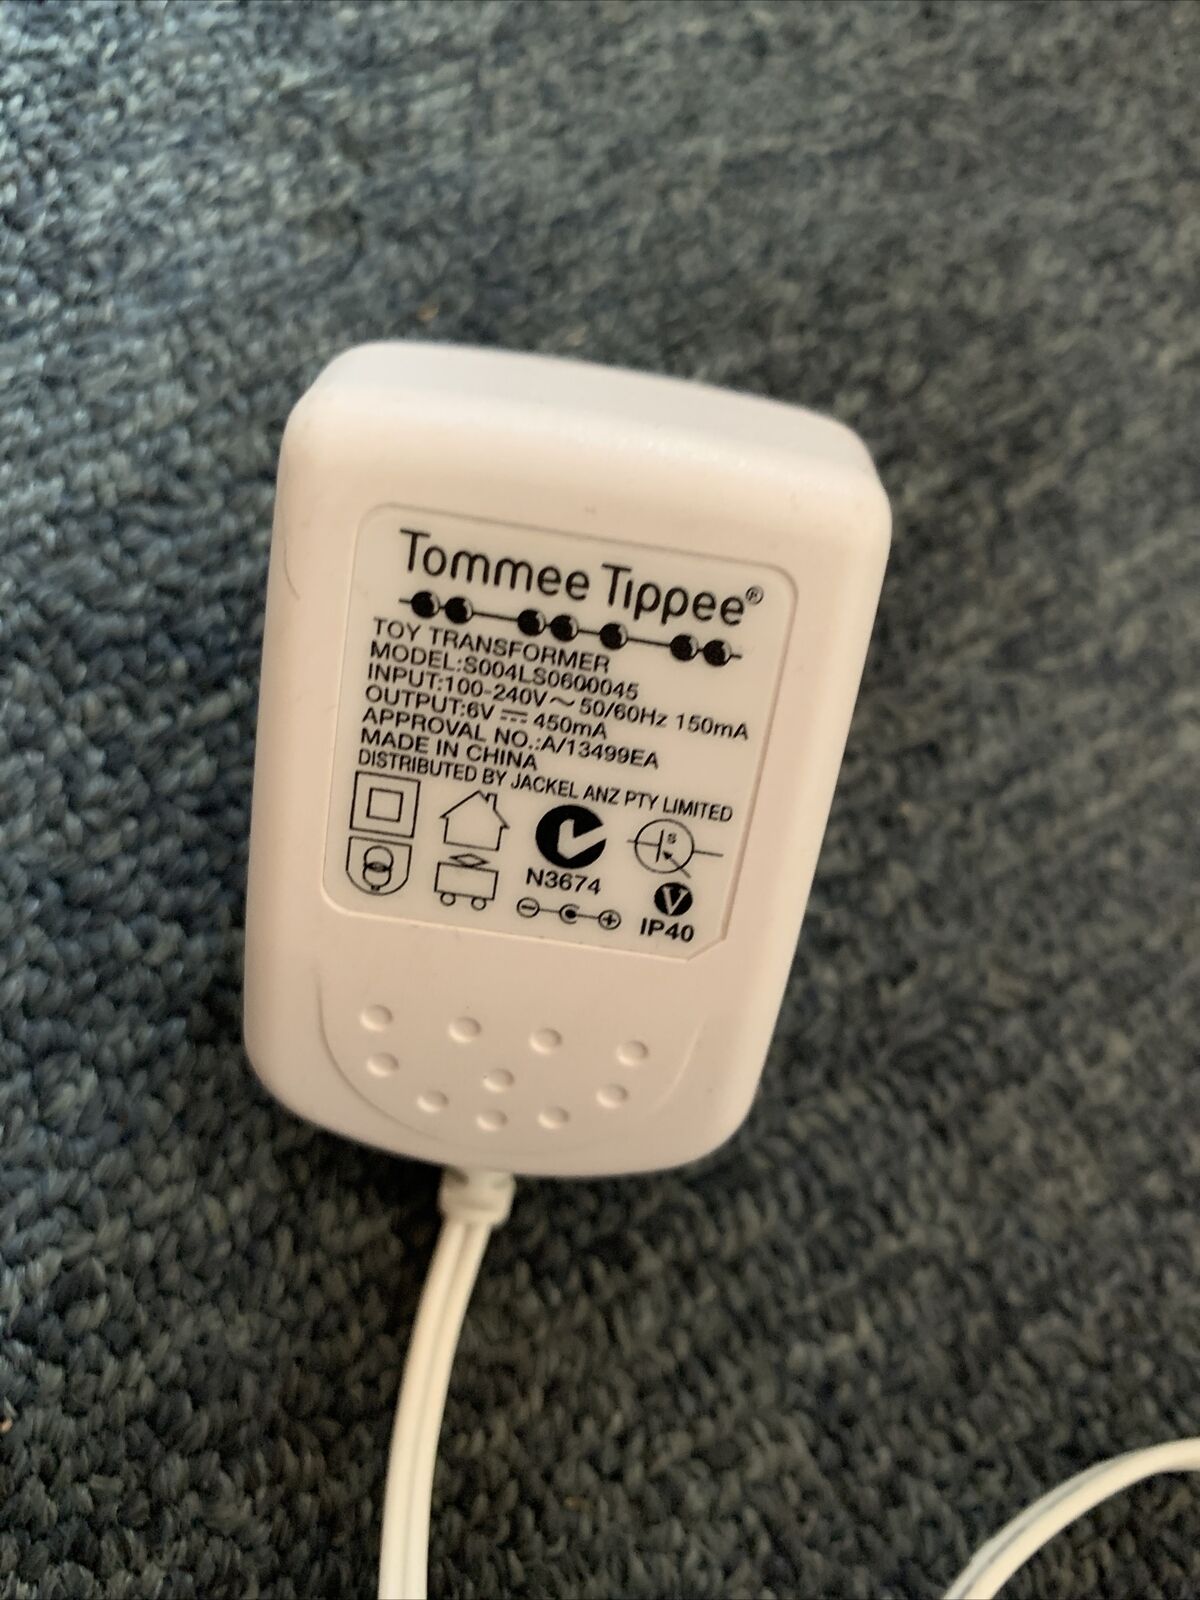 Tommee Tippee Toy Transformer S004LS0600045 AC Adapter 6V 450mA Colour: White Compatible Brand: Tommee Tippee Type: